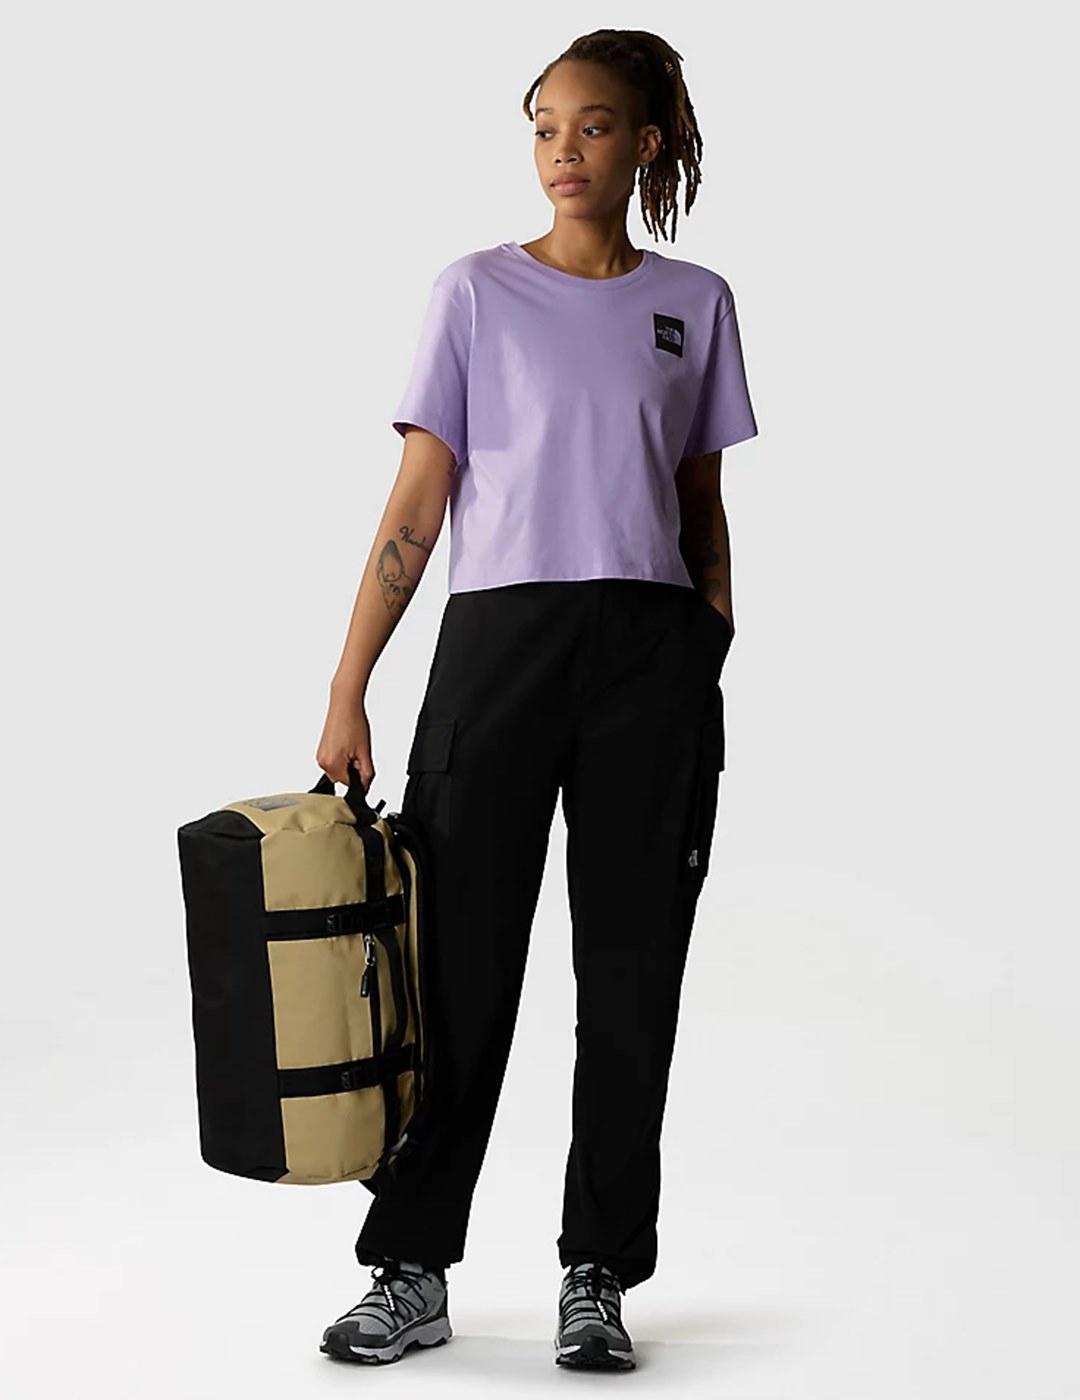 Camiseta The North Face Cropped Fine Lilac